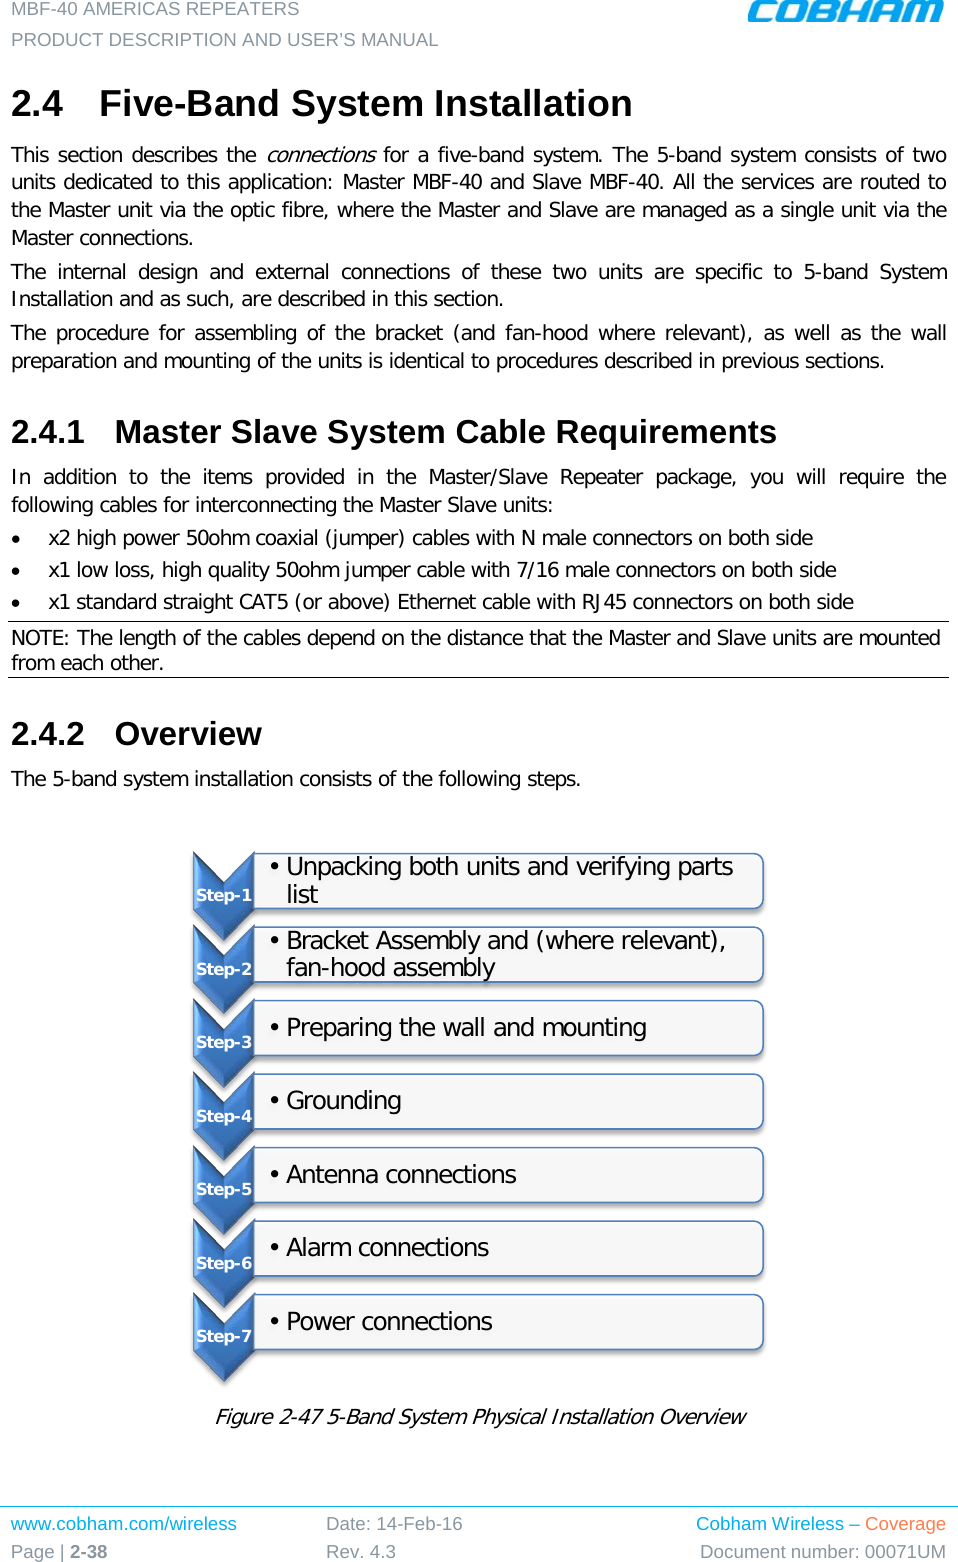 MBF-40 AMERICAS REPEATERS PRODUCT DESCRIPTION AND USER’S MANUAL www.cobham.com/wireless Page | 2-38 Date: 14-Feb-16 Rev. 4.3 Cobham Wireless – Coverage Document number: 00071UM  2.4  Five-Band System Installation This section describes the connections for a five-band system. The 5-band system consists of two units dedicated to this application: Master MBF-40 and Slave MBF-40. All the services are routed to the Master unit via the optic fibre, where the Master and Slave are managed as a single unit via the Master connections.  The internal design and external connections of these two  units are specific to 5-band System Installation and as such, are described in this section.  The procedure for assembling of the bracket (and fan-hood where relevant), as well as the wall preparation and mounting of the units is identical to procedures described in previous sections. 2.4.1  Master Slave System Cable Requirements  In addition to the items provided in the Master/Slave Repeater package, you will require the following cables for interconnecting the Master Slave units: • x2 high power 50ohm coaxial (jumper) cables with N male connectors on both side • x1 low loss, high quality 50ohm jumper cable with 7/16 male connectors on both side • x1 standard straight CAT5 (or above) Ethernet cable with RJ45 connectors on both side NOTE: The length of the cables depend on the distance that the Master and Slave units are mounted from each other. 2.4.2  Overview The 5-band system installation consists of the following steps.   Figure  2-47 5-Band System Physical Installation Overview Step-1  •Unpacking both units and verifying parts list Step-2  •Bracket Assembly and (where relevant), fan-hood assembly Step-3  •Preparing the wall and mounting Step-4  •Grounding Step-5  •Antenna connections Step-6  •Alarm connections Step-7 •Power connections 